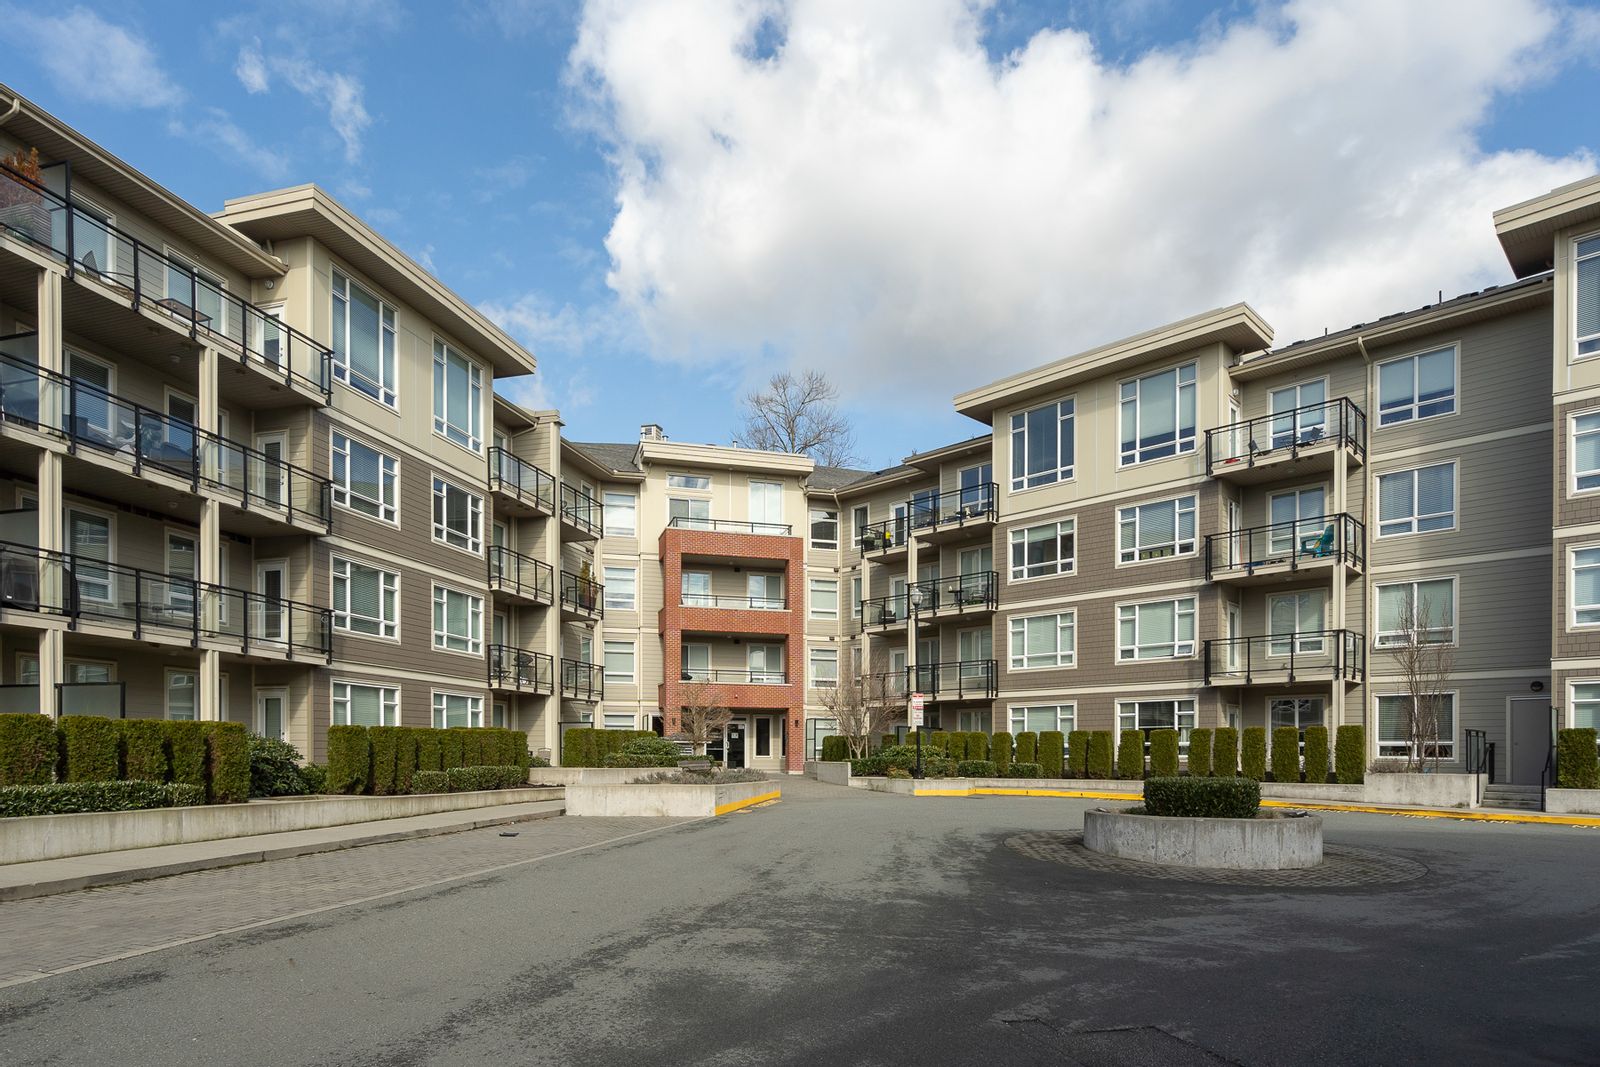 NEW PRICE: C322 20211 66th Ave., Langley, Willoughby Heights